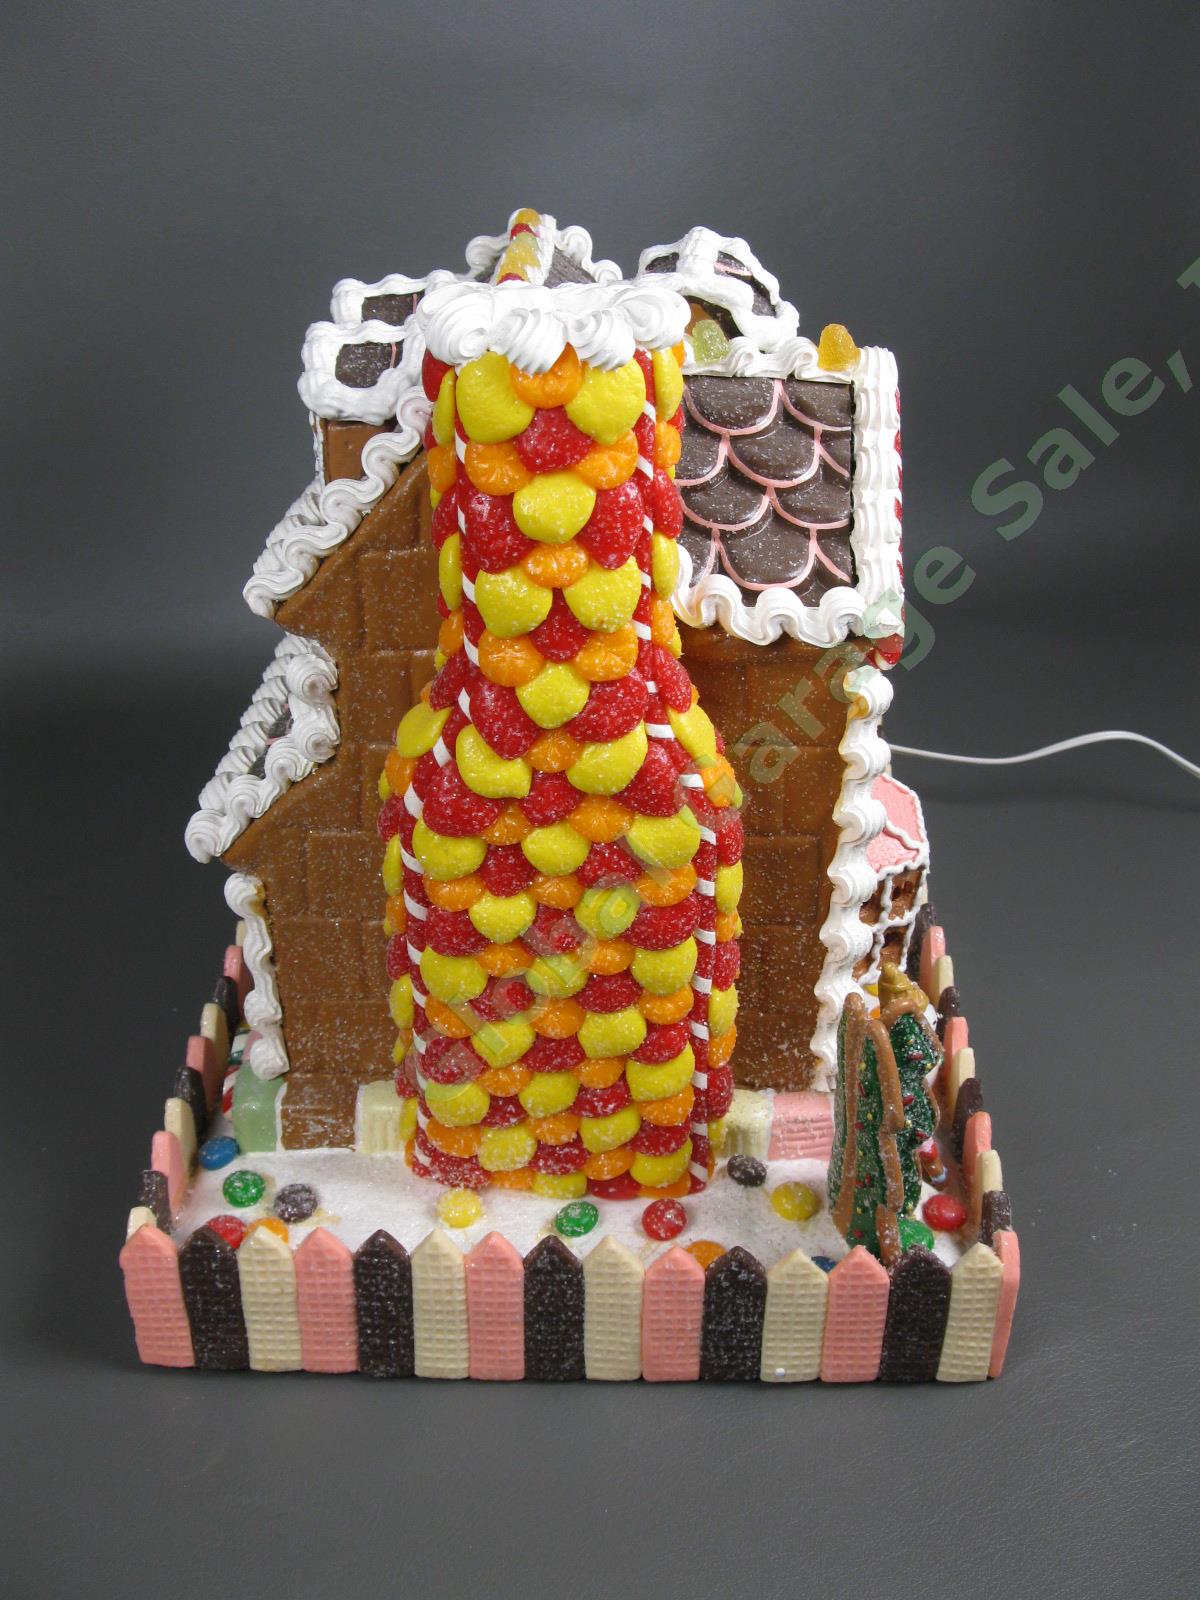 Traditions Christmas Lighted Gingerbread House with Santa Village 433439 Working 2